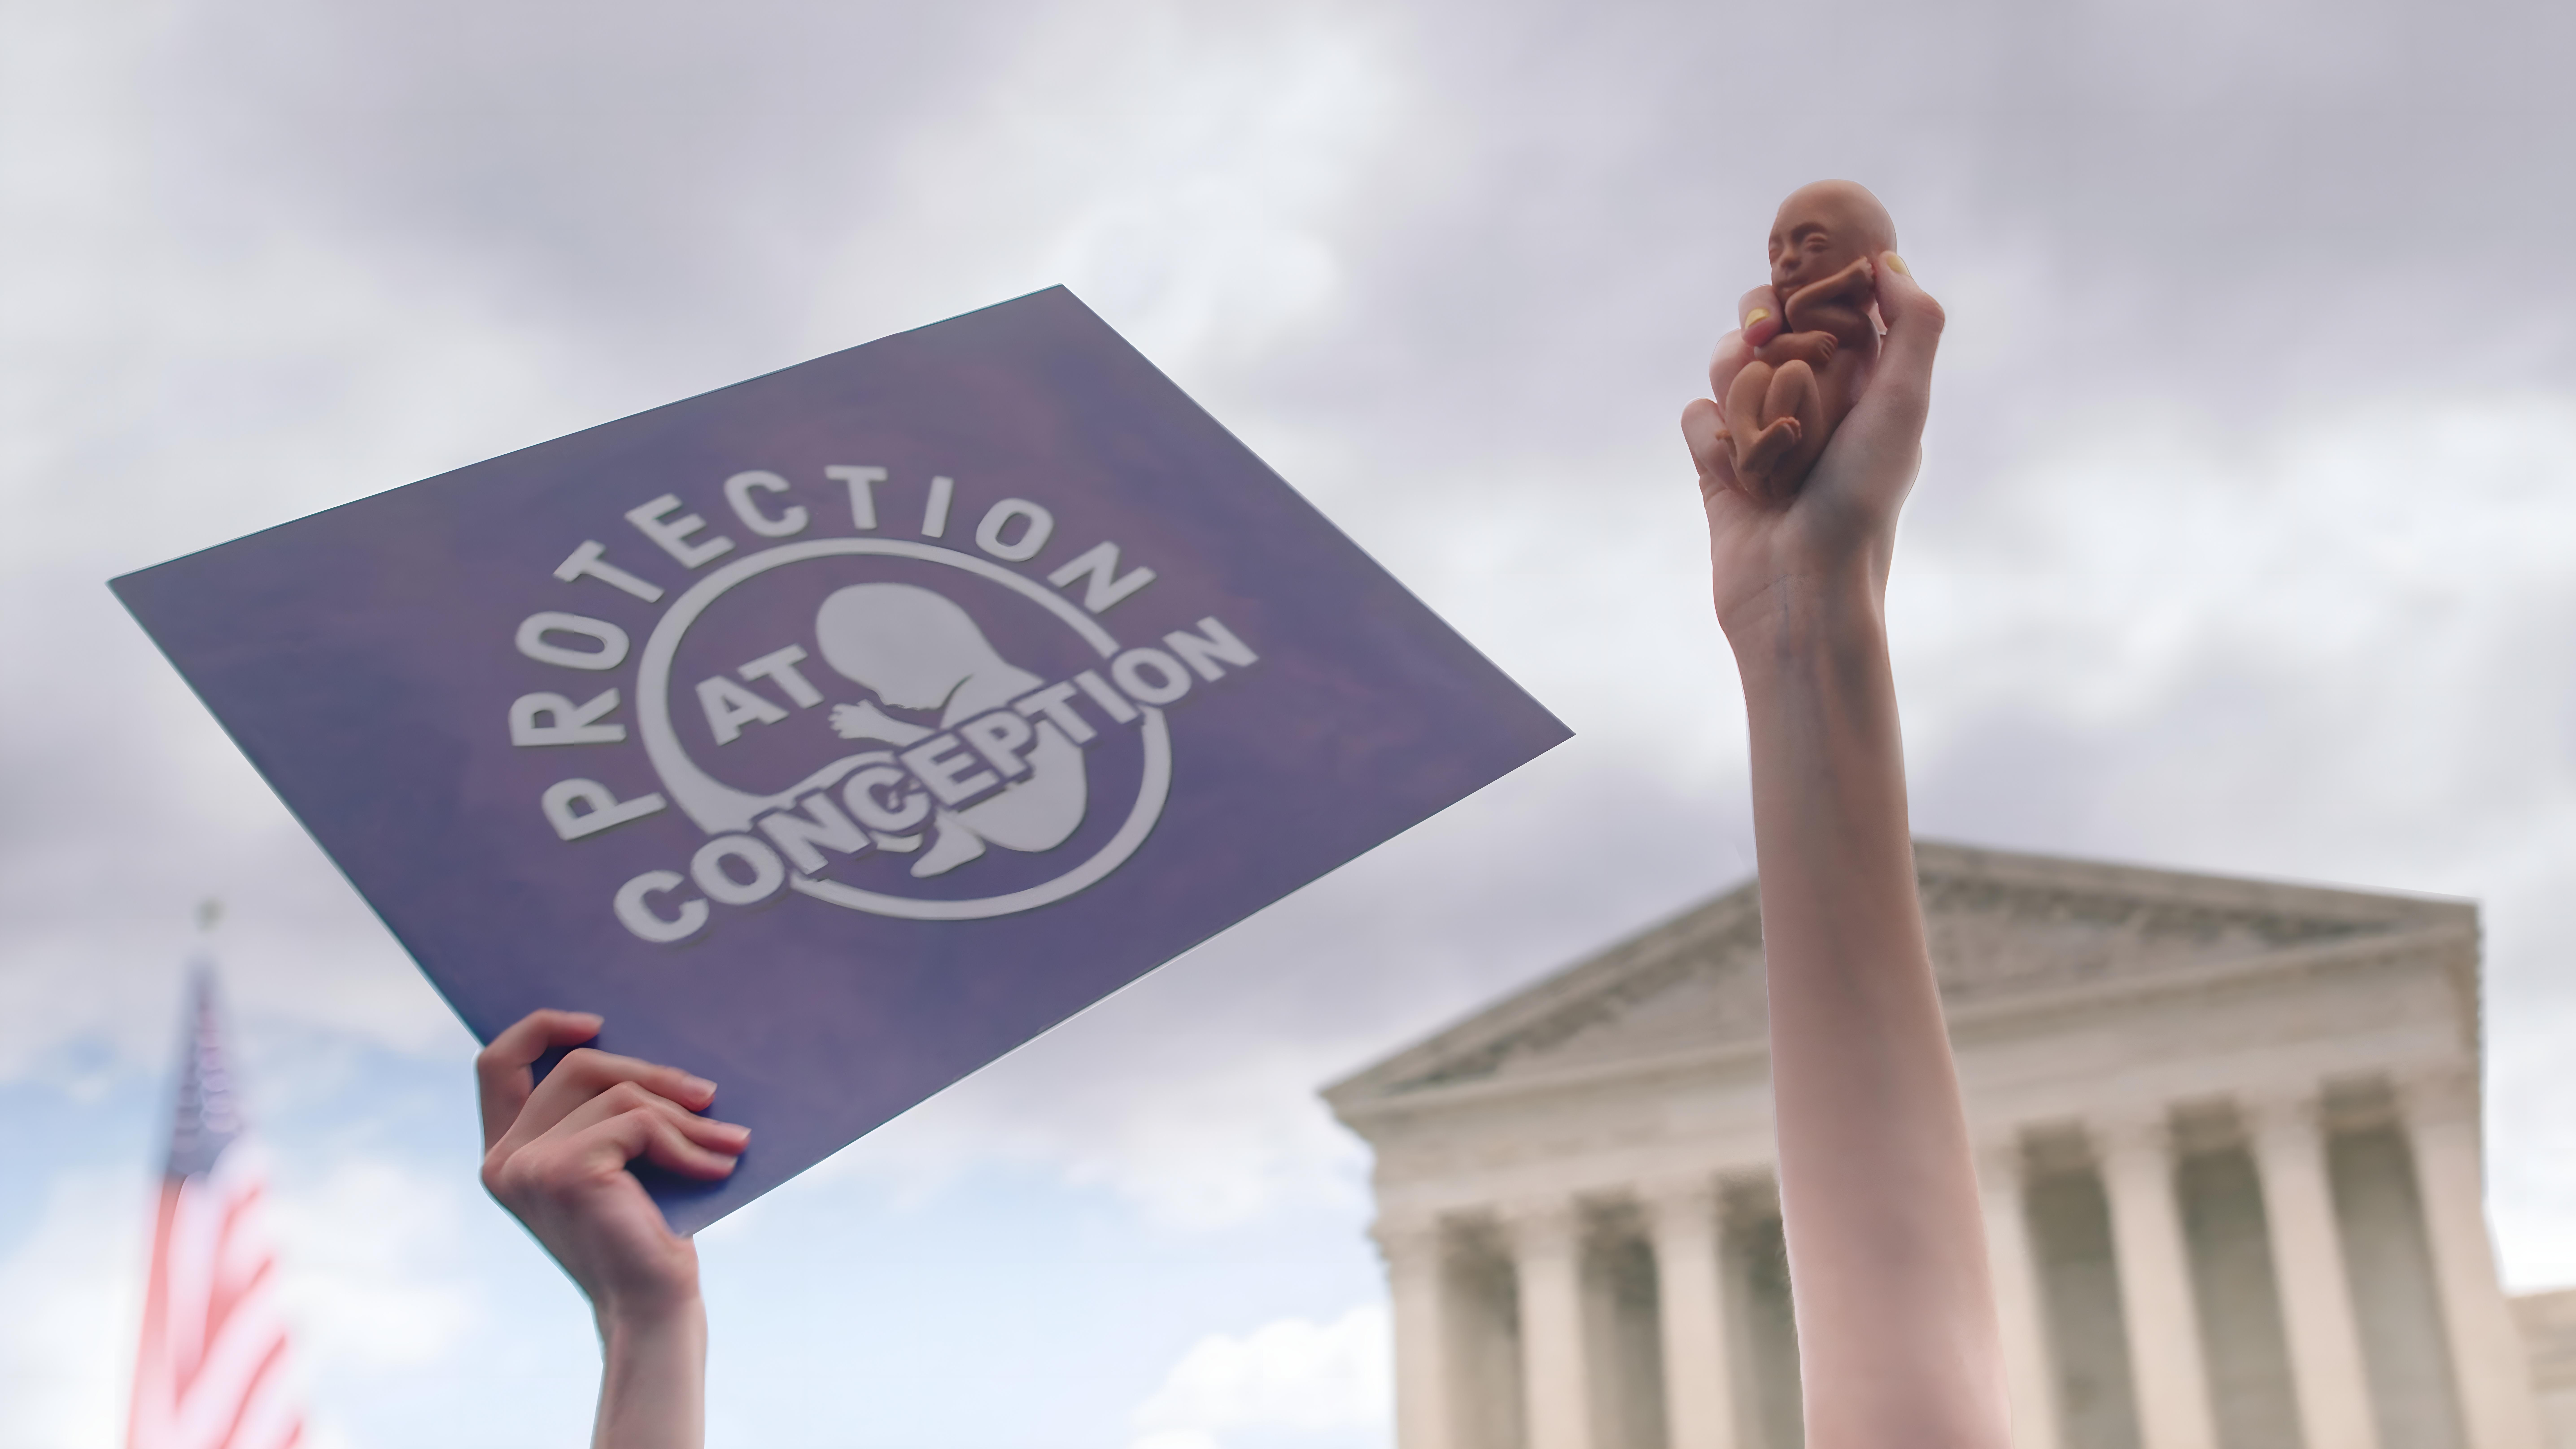 A close up photo of one hand holding a sign reading "Protection at Conception" and another holding a plastic fetus. In the background, is the U.S. Supreme Court building.